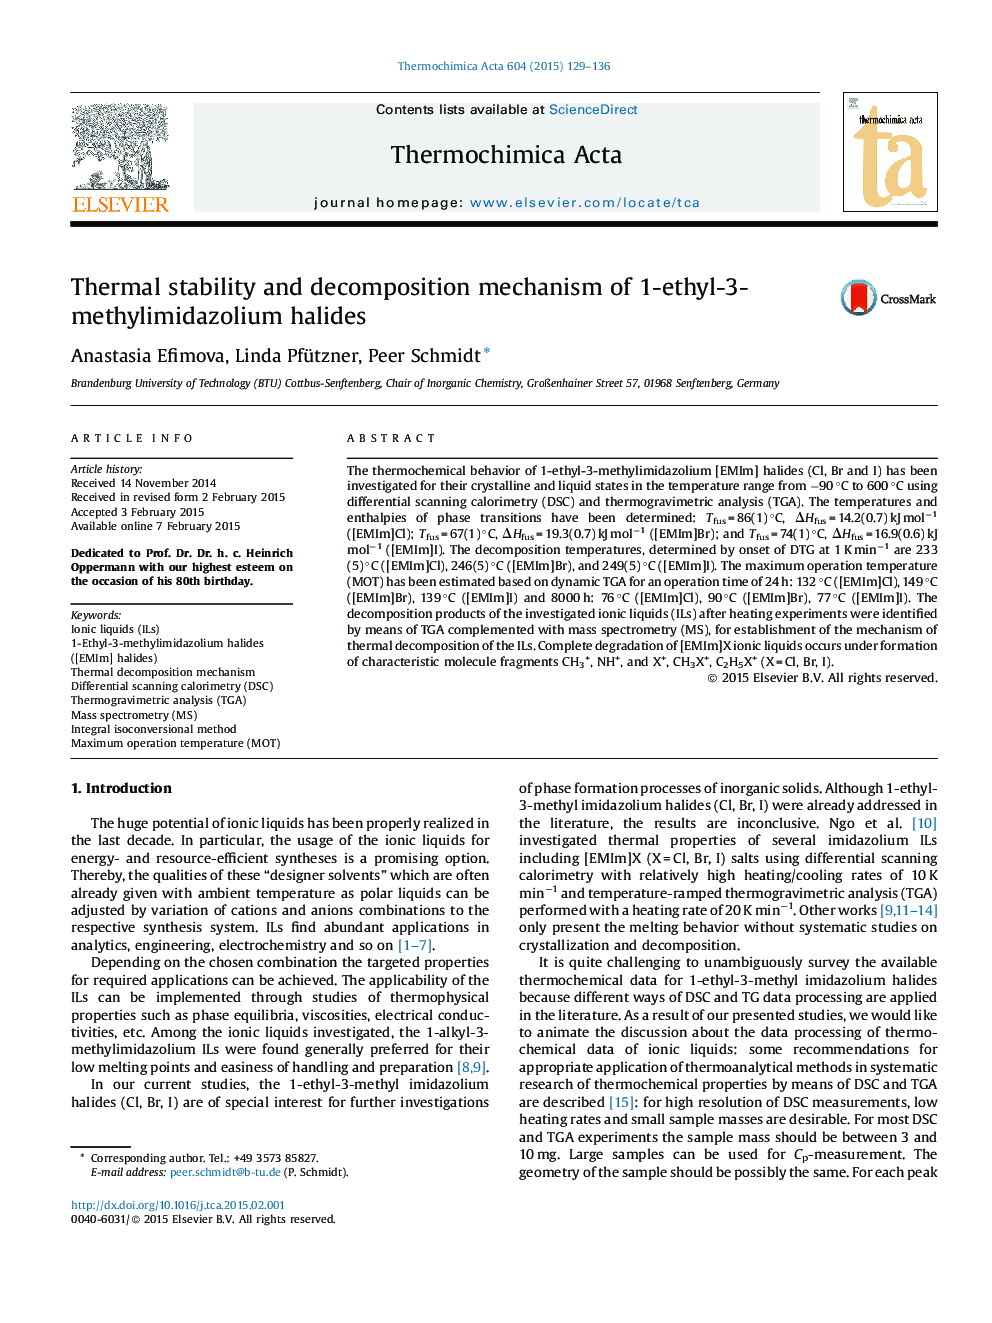 Thermal stability and decomposition mechanism of 1-ethyl-3-methylimidazolium halides